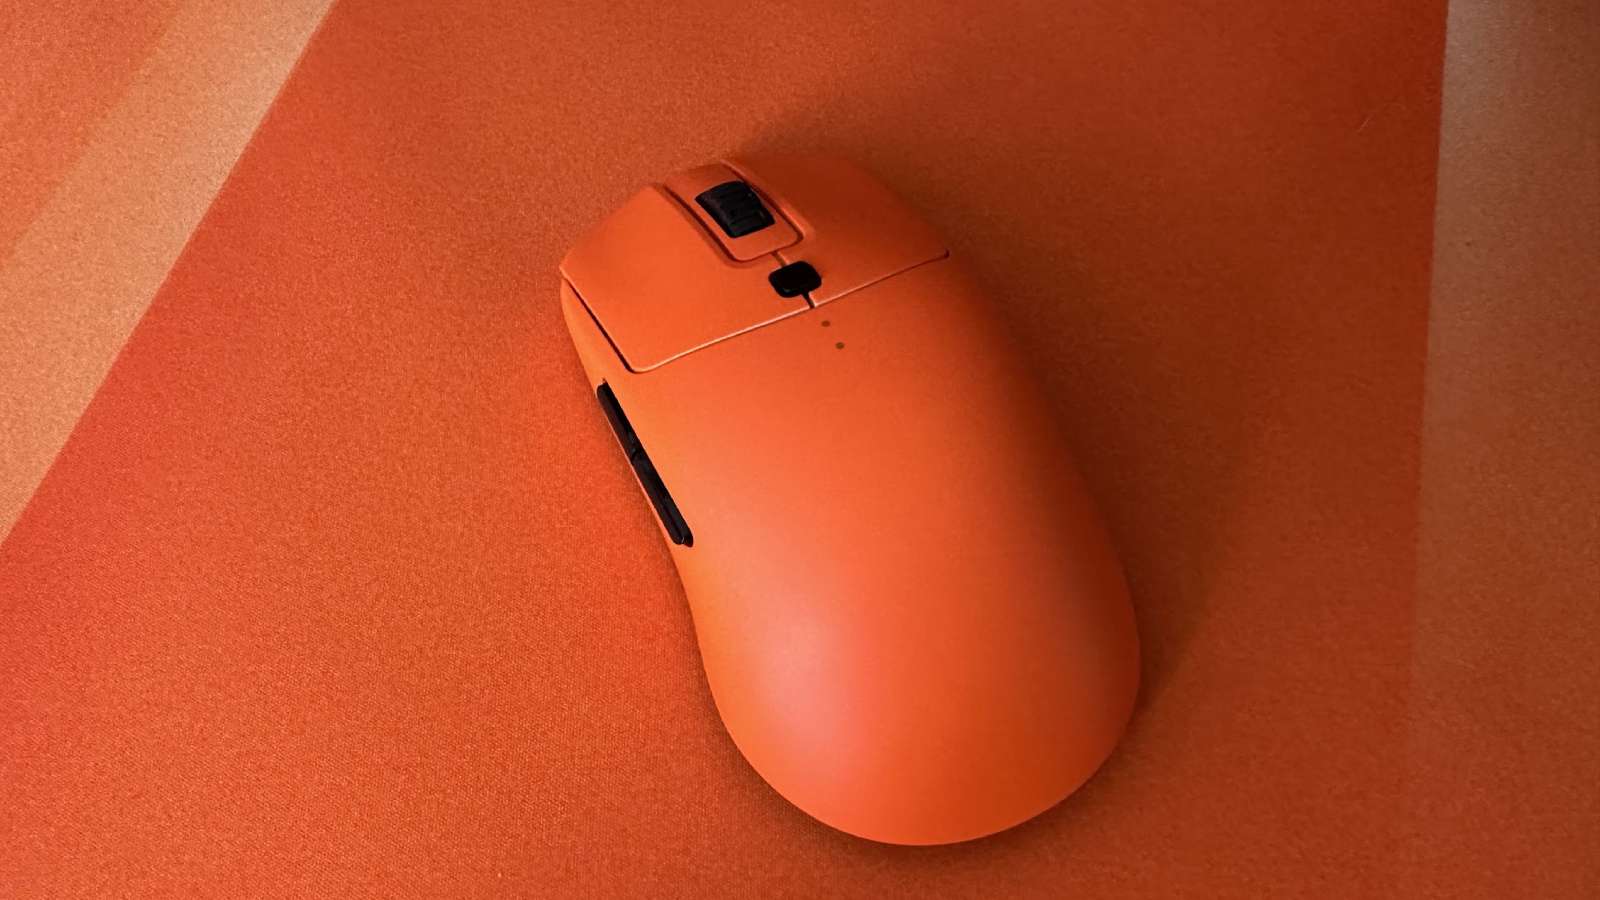 Vaxee XE mouse overhead view